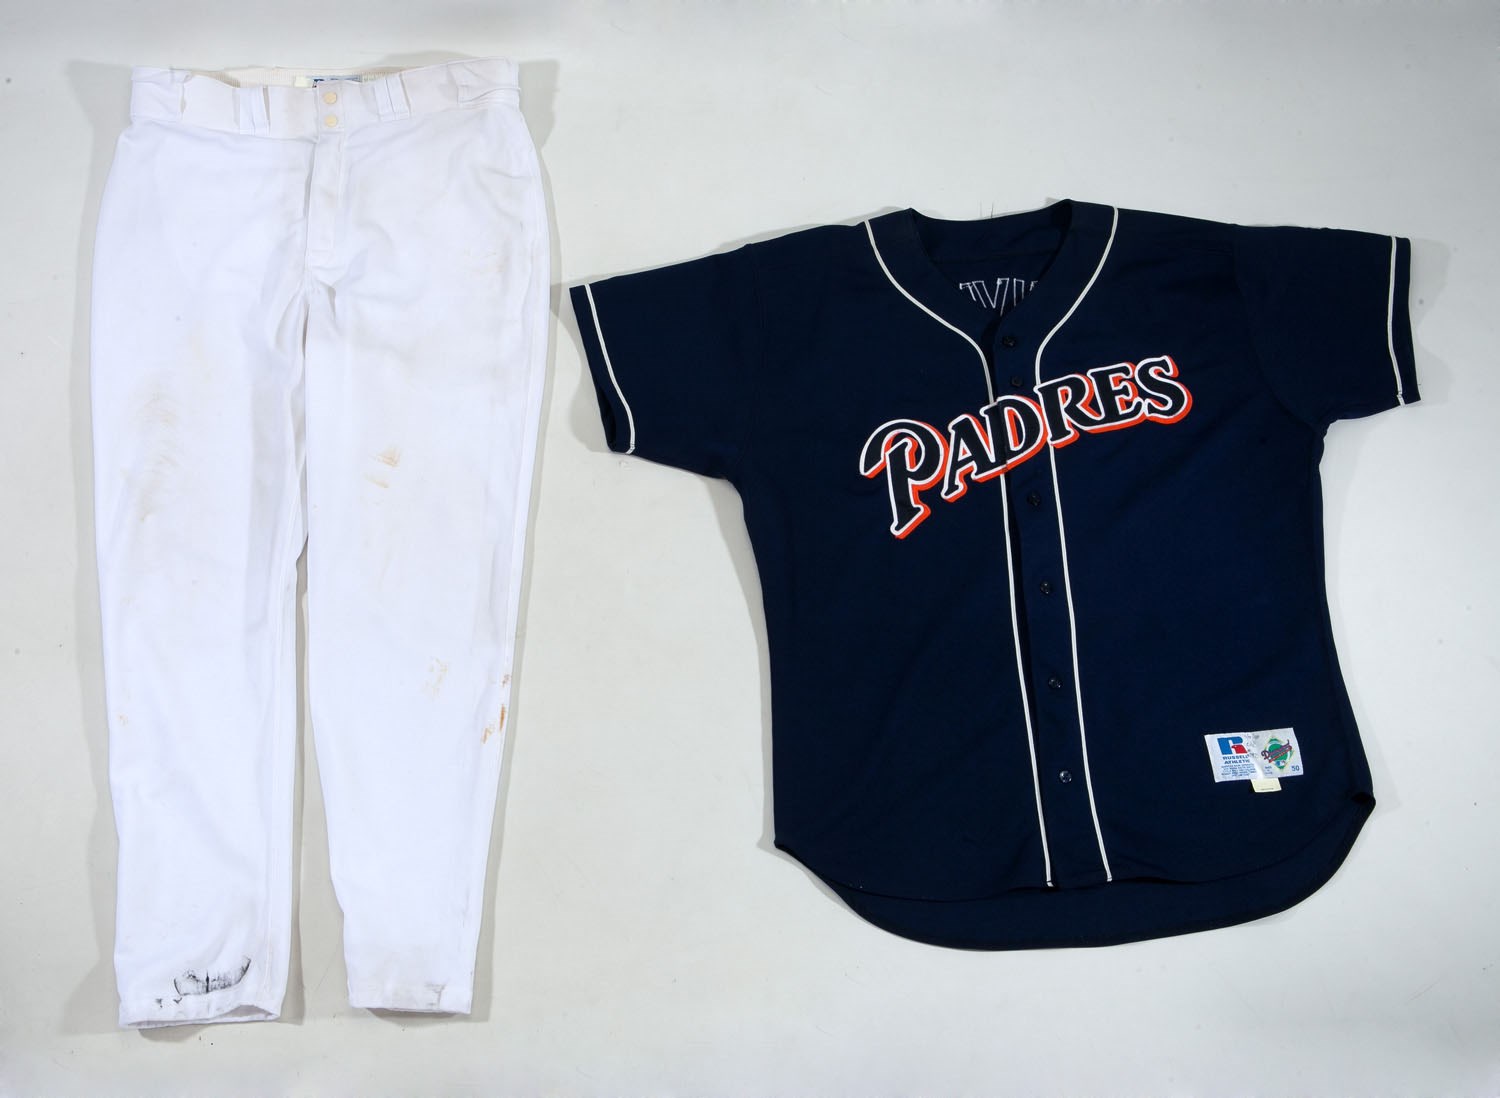 Lot Detail - TONY GWYNN'S 9/14/1998 CAREER HIT #2,915 GAME WORN & SIGNED  UNIFORM ENSEMBLE INCL. JERSEY, PANTS, CAP, BATTING GLOVES & WRISTBANDS  (SDHOC COLLECTION)